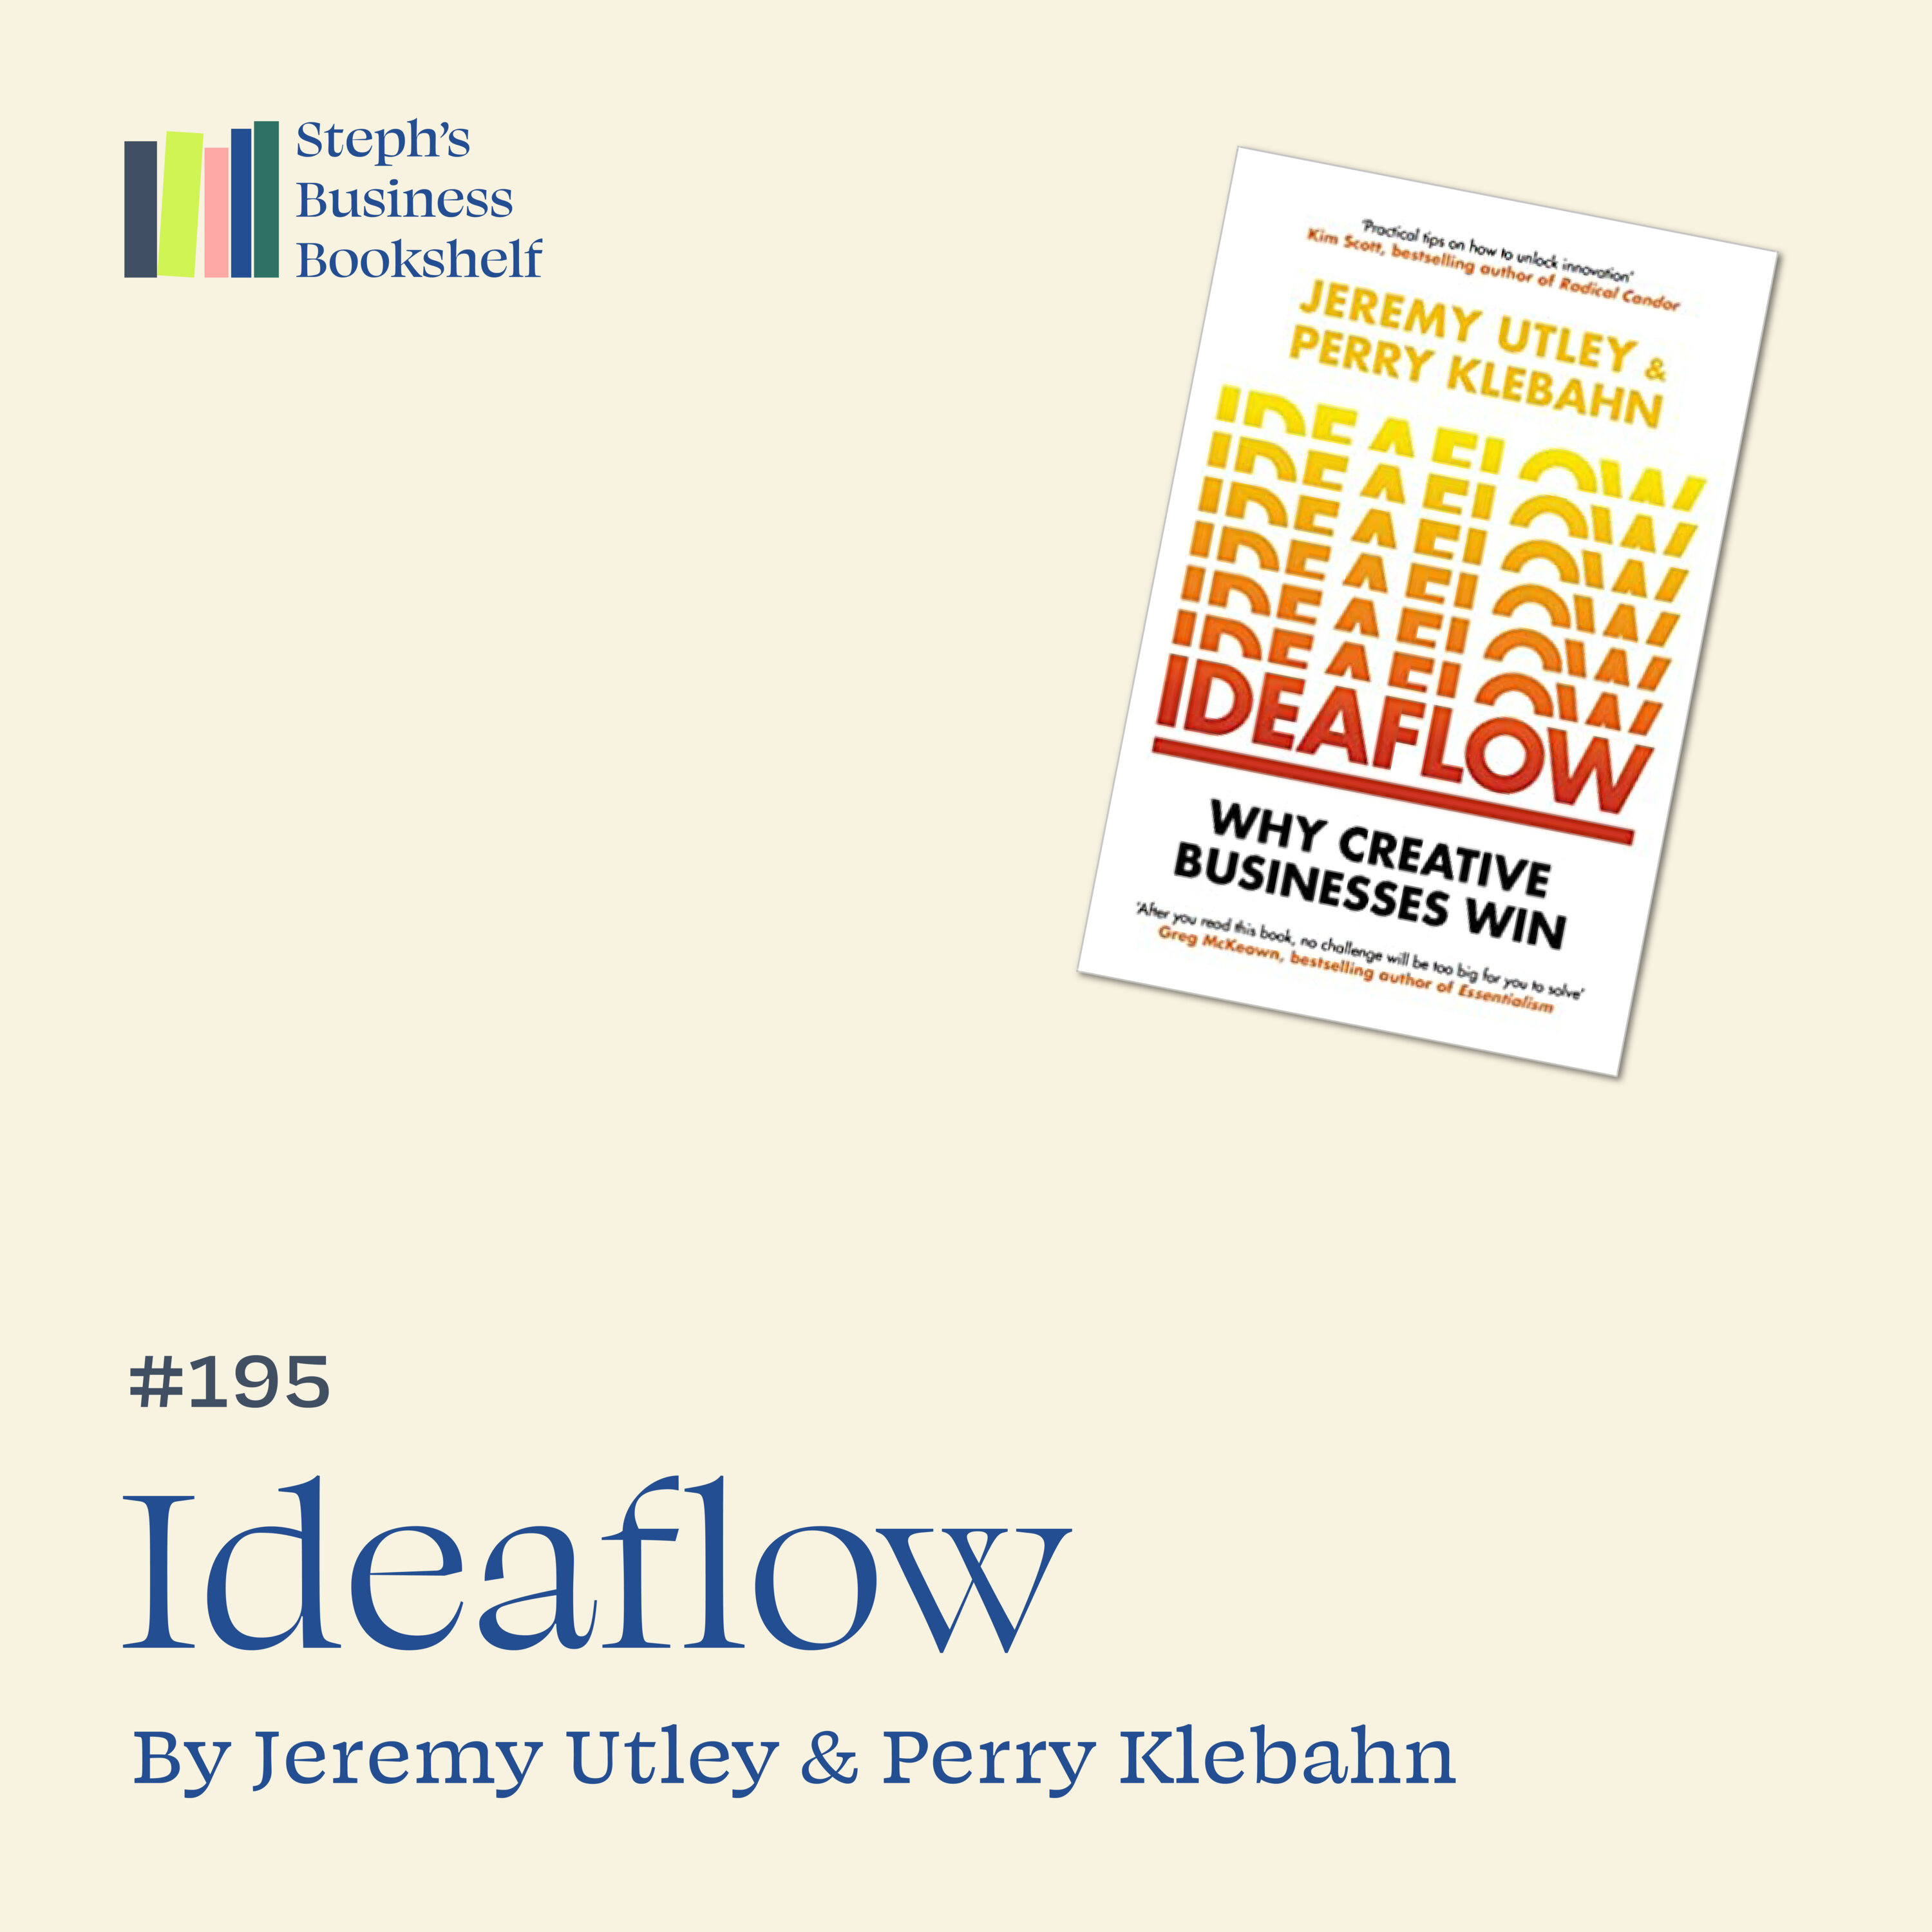 Ideaflow by Jeremy Utley and Perry Klebahn: how to have more ideas Image